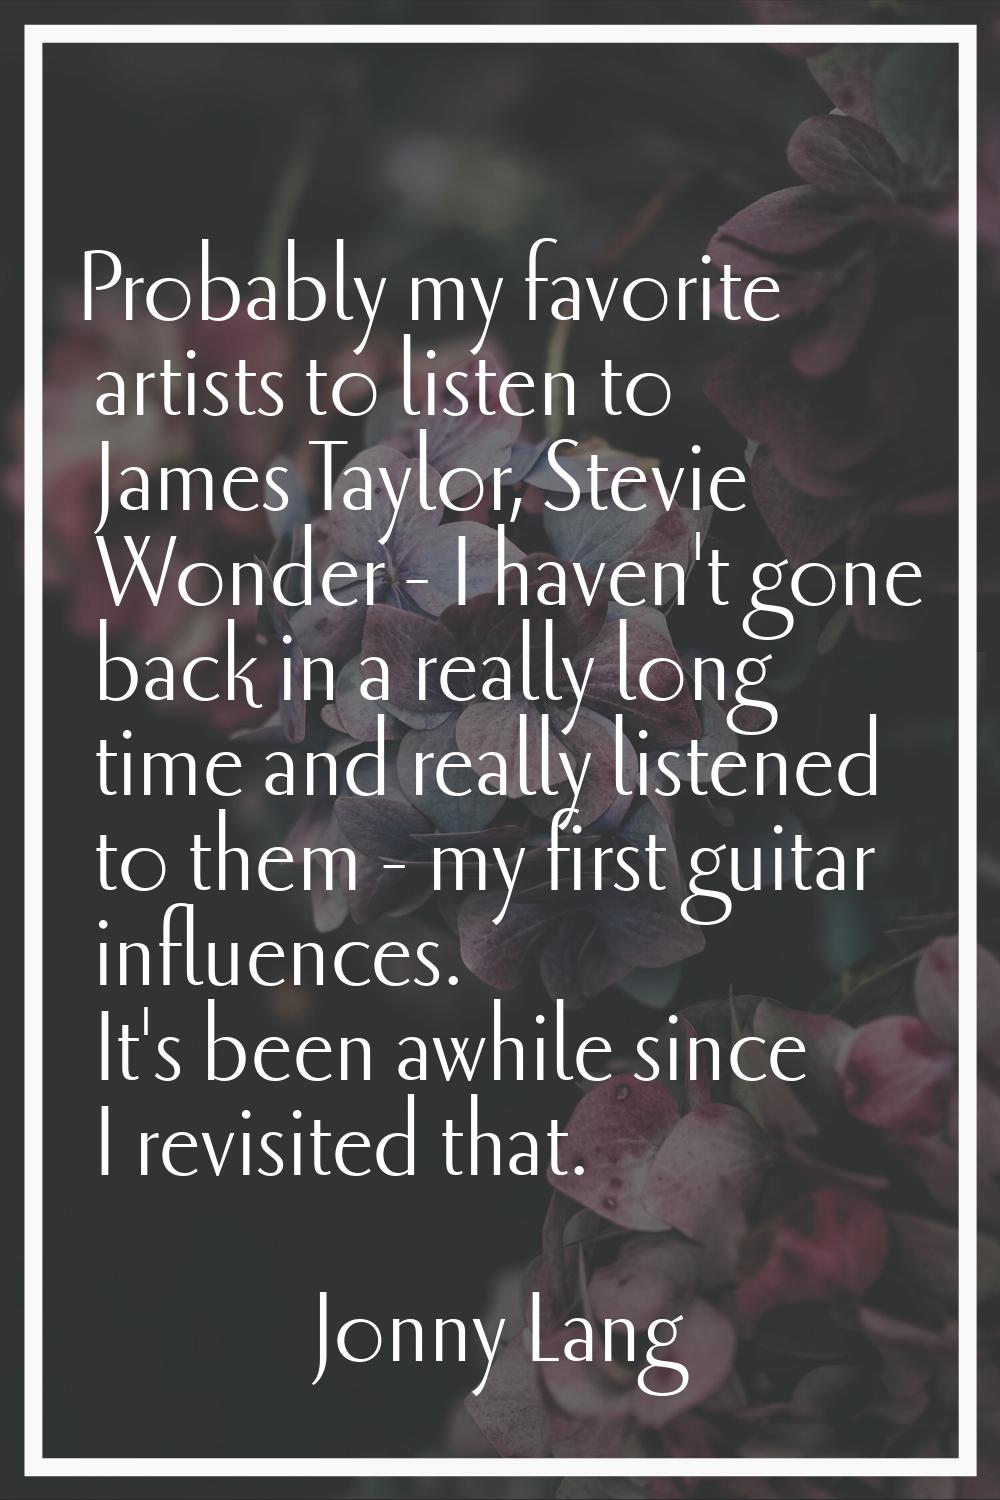 Probably my favorite artists to listen to James Taylor, Stevie Wonder - I haven't gone back in a re